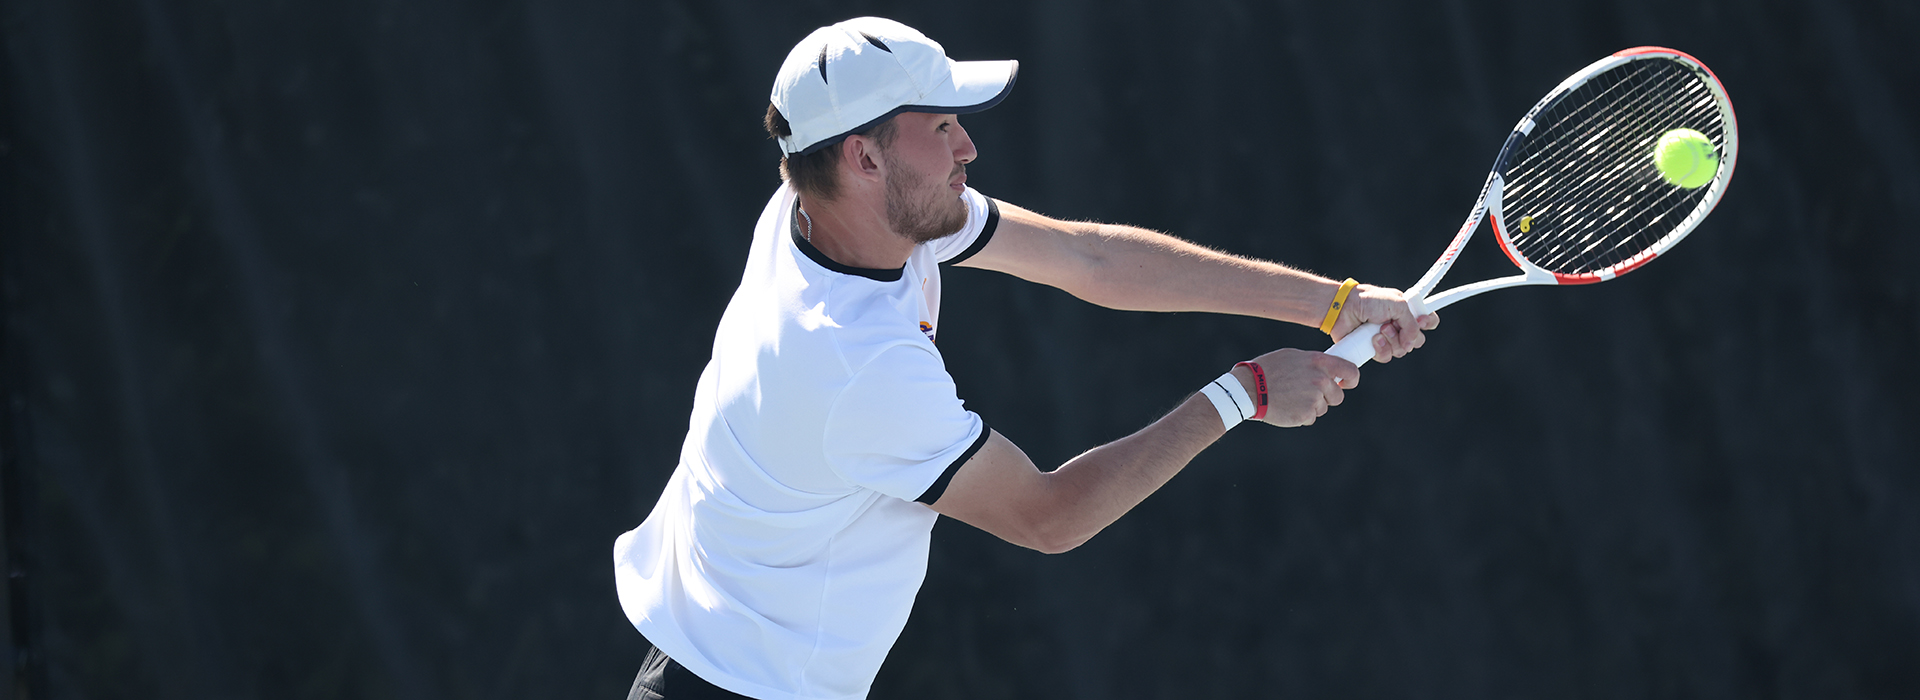 Tech tennis travels to Southern Indiana to open month of April